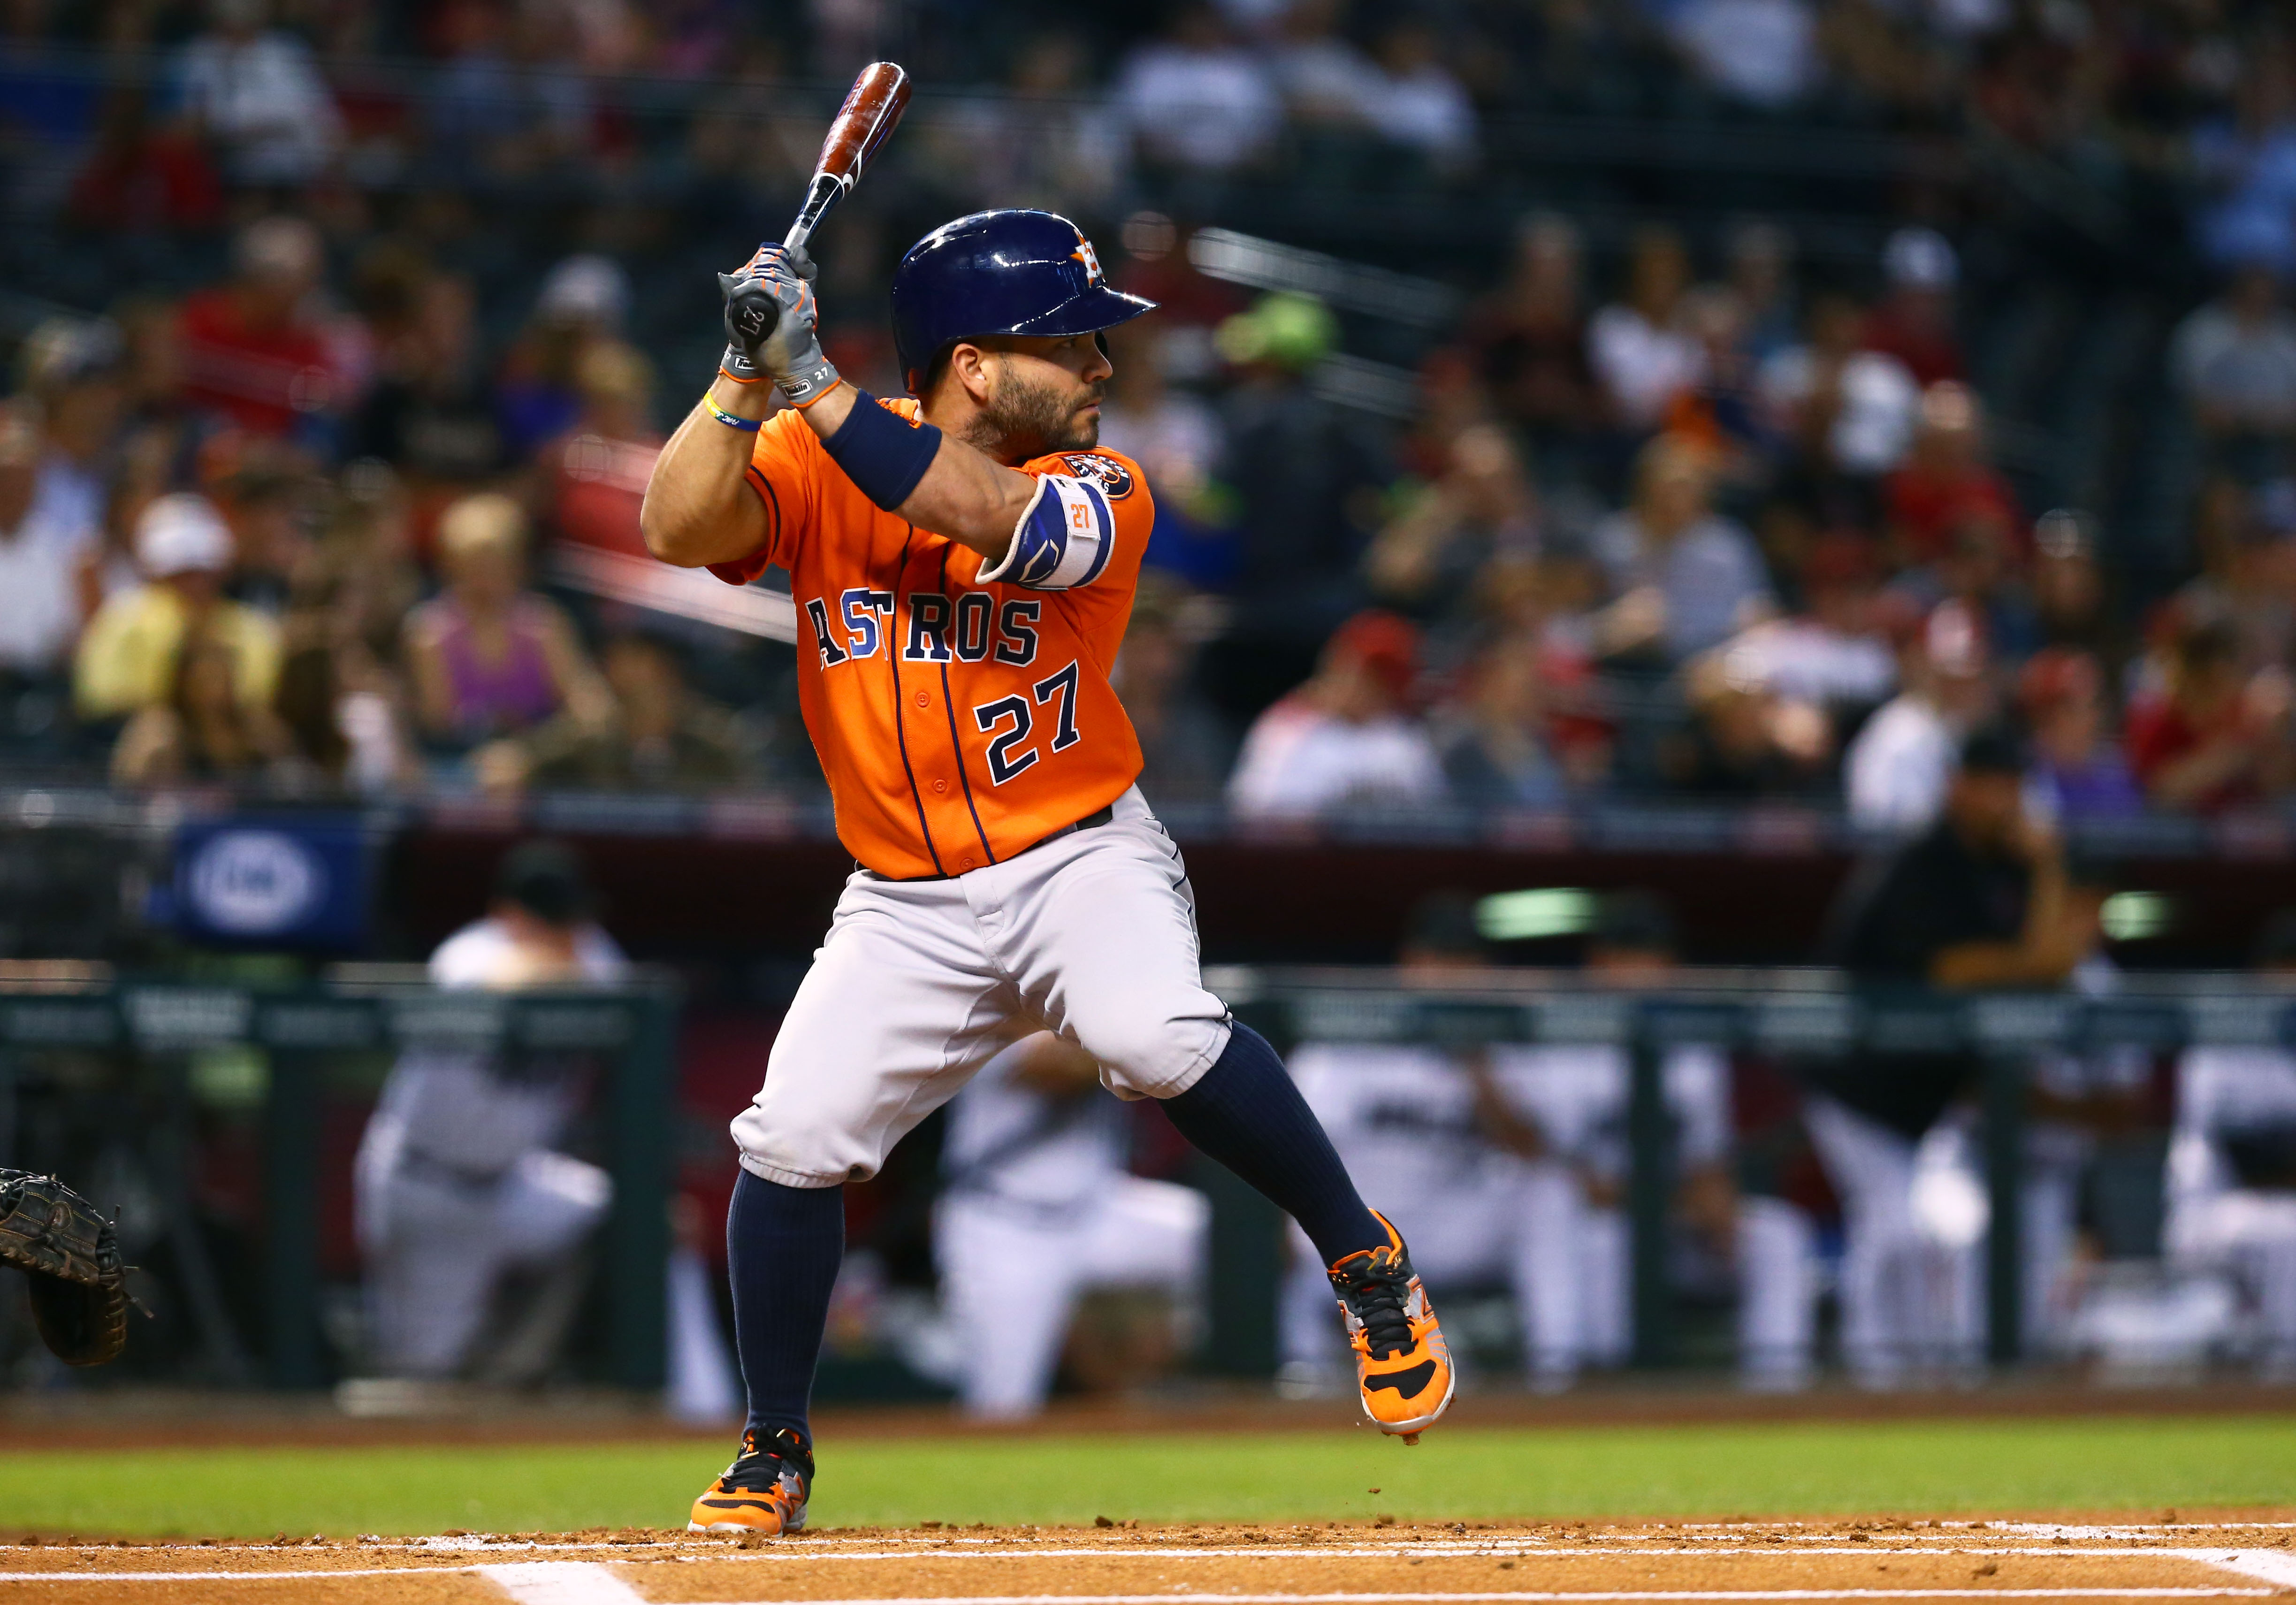 Astros: Jose Altuve is the Perfect Star that Most Teams Need